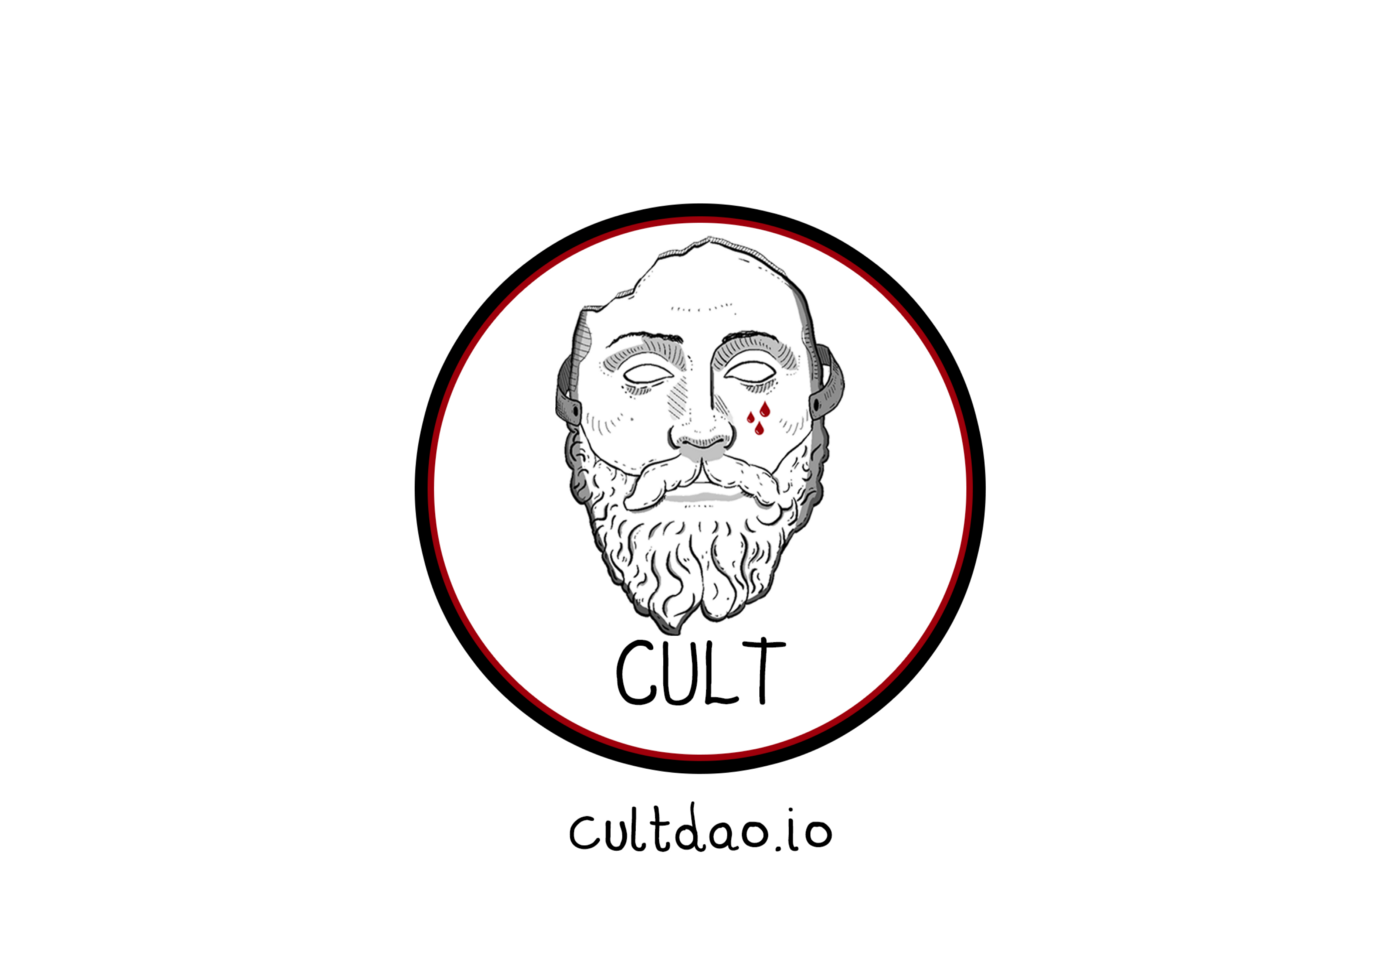 What is Cult DAO?